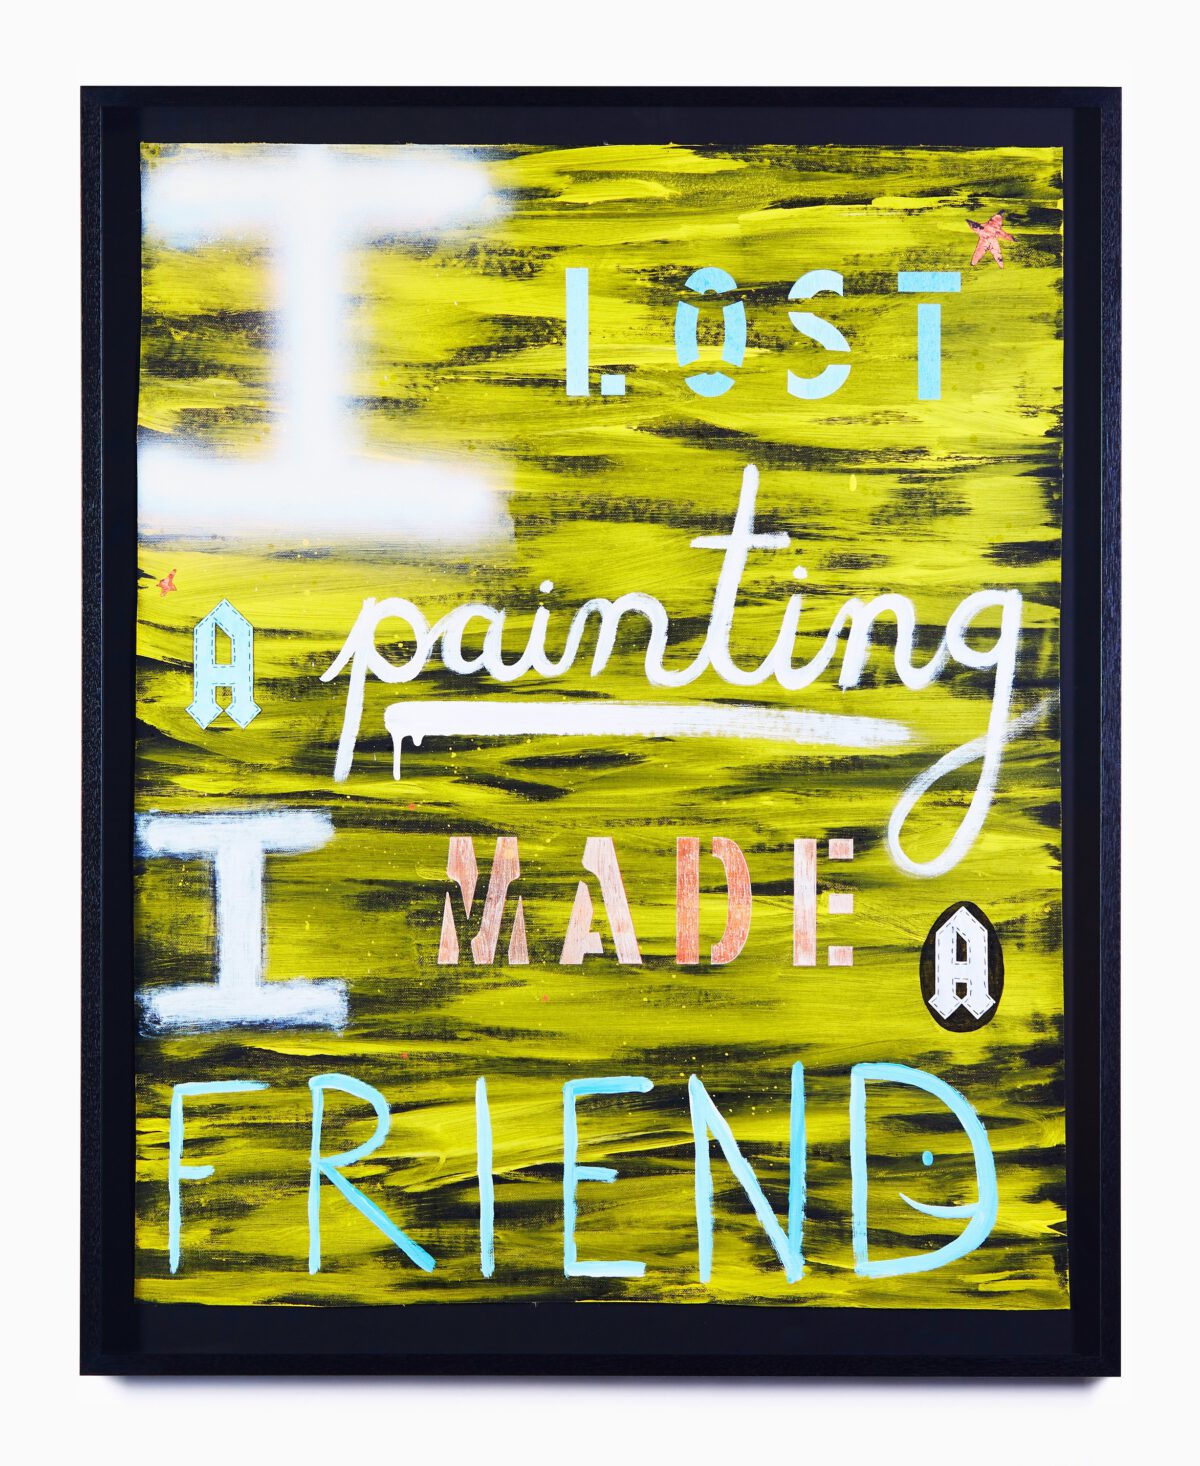 I LOST A painting I GAINED A FRIEND copy 2